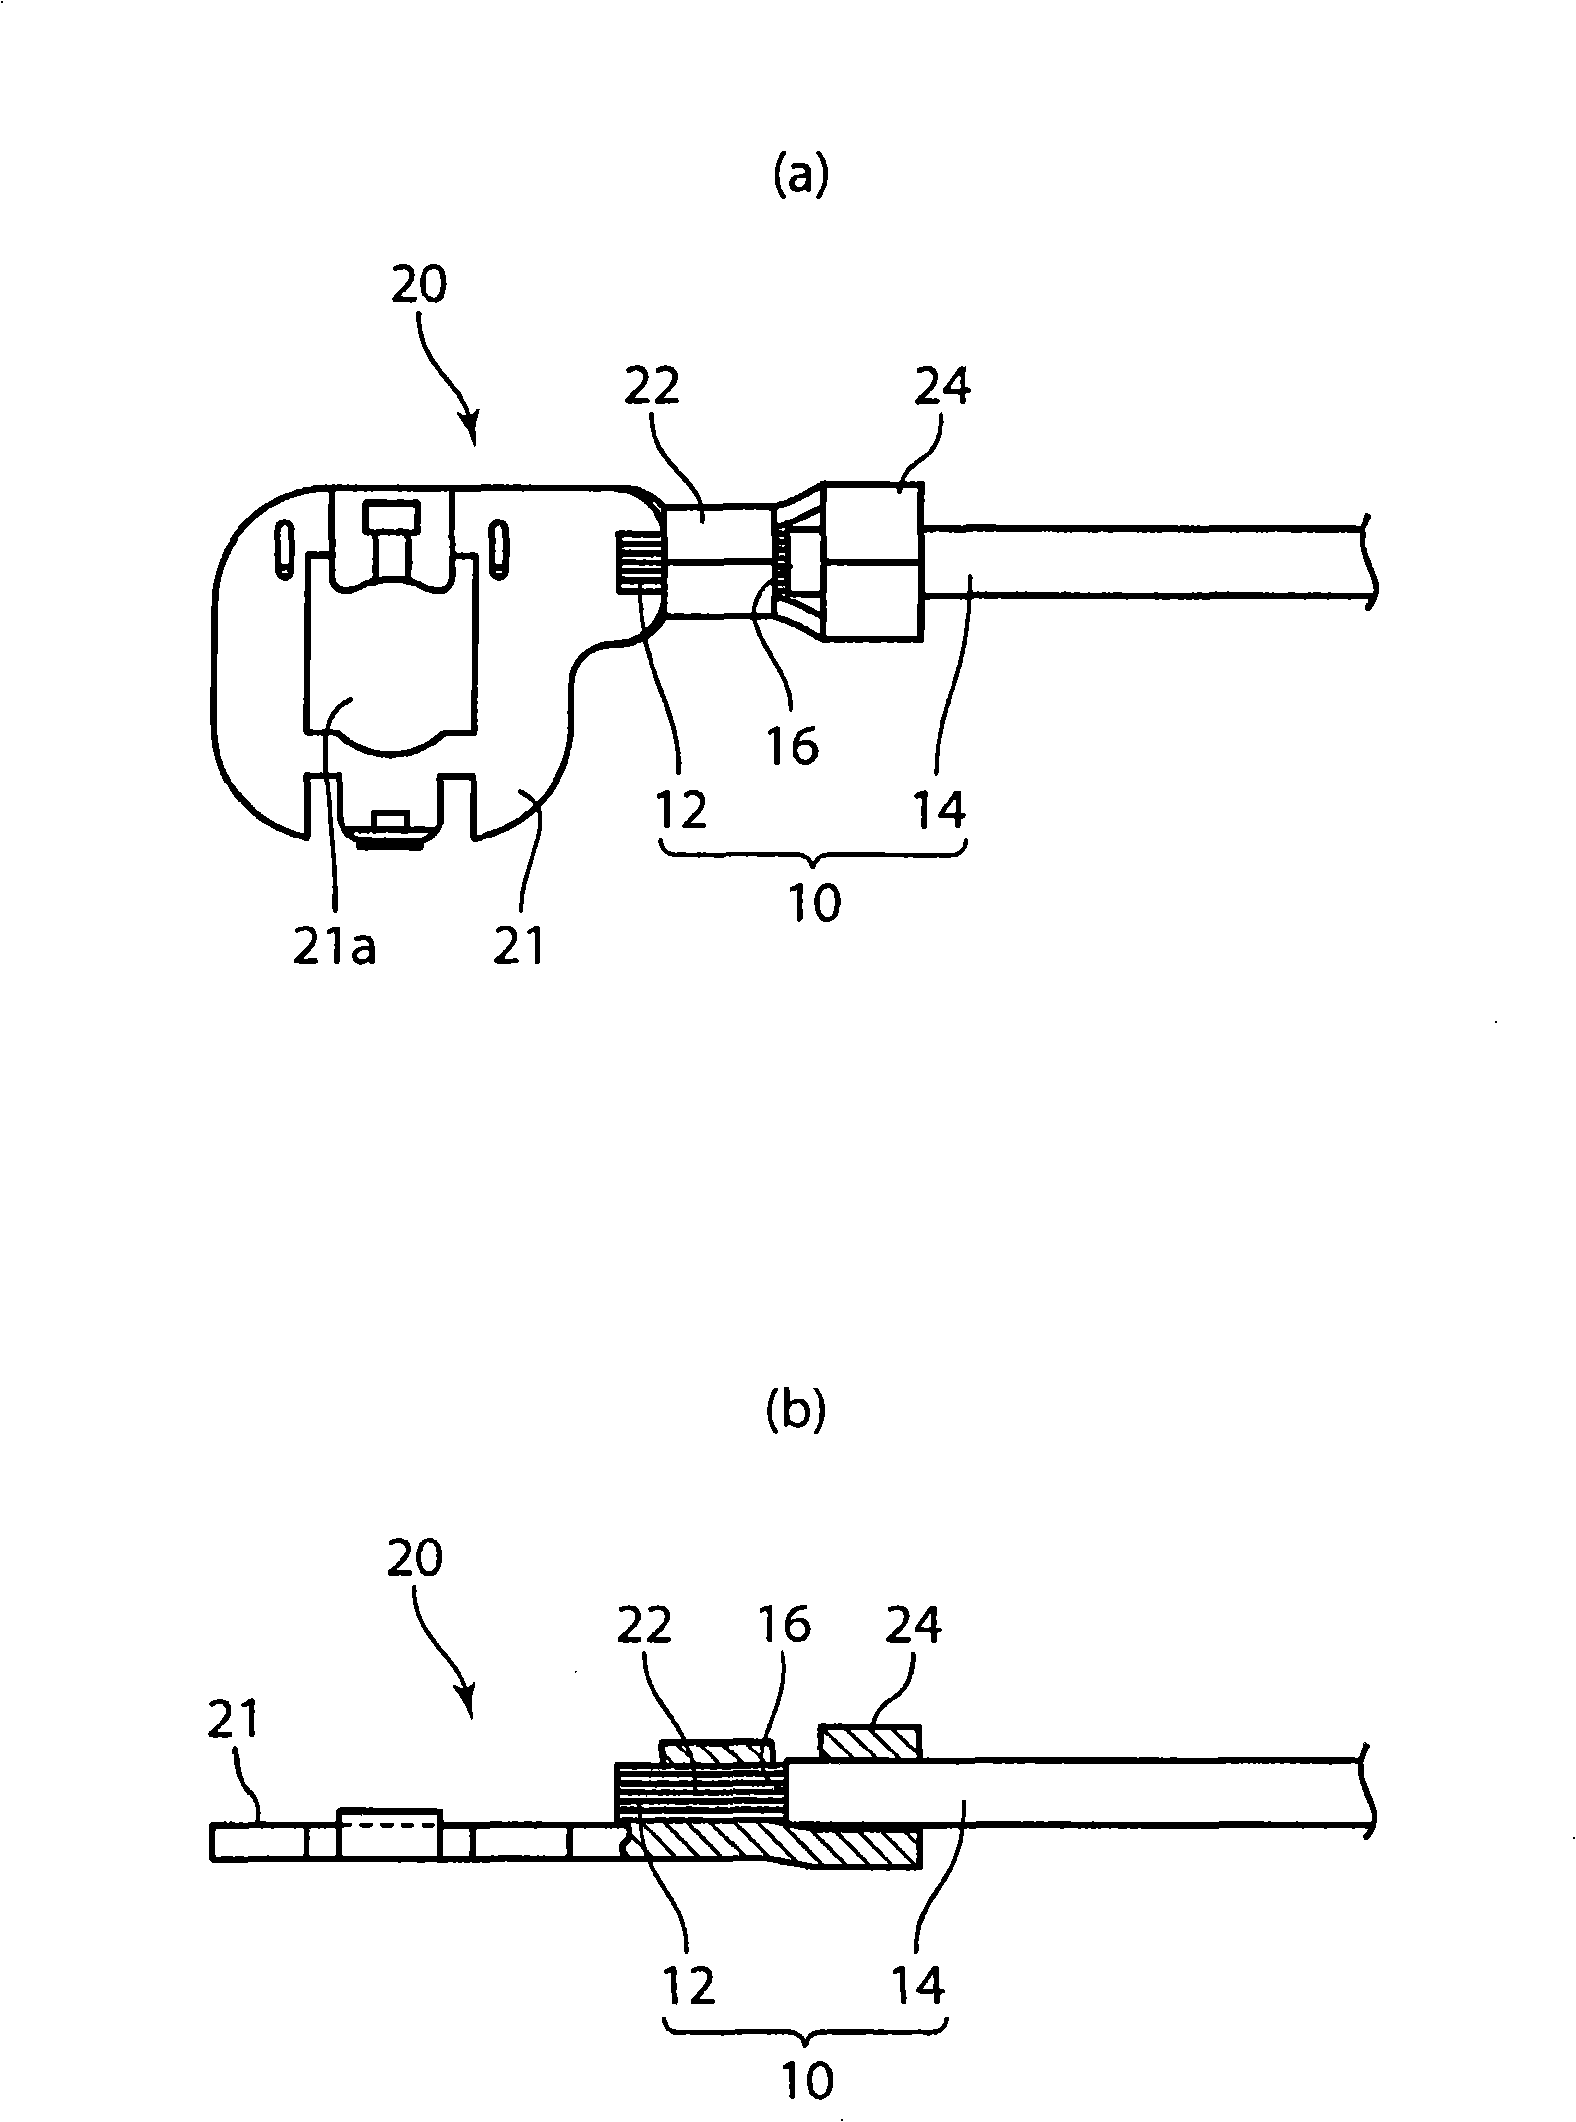 Method for water stopping in on-vehicle electric wires